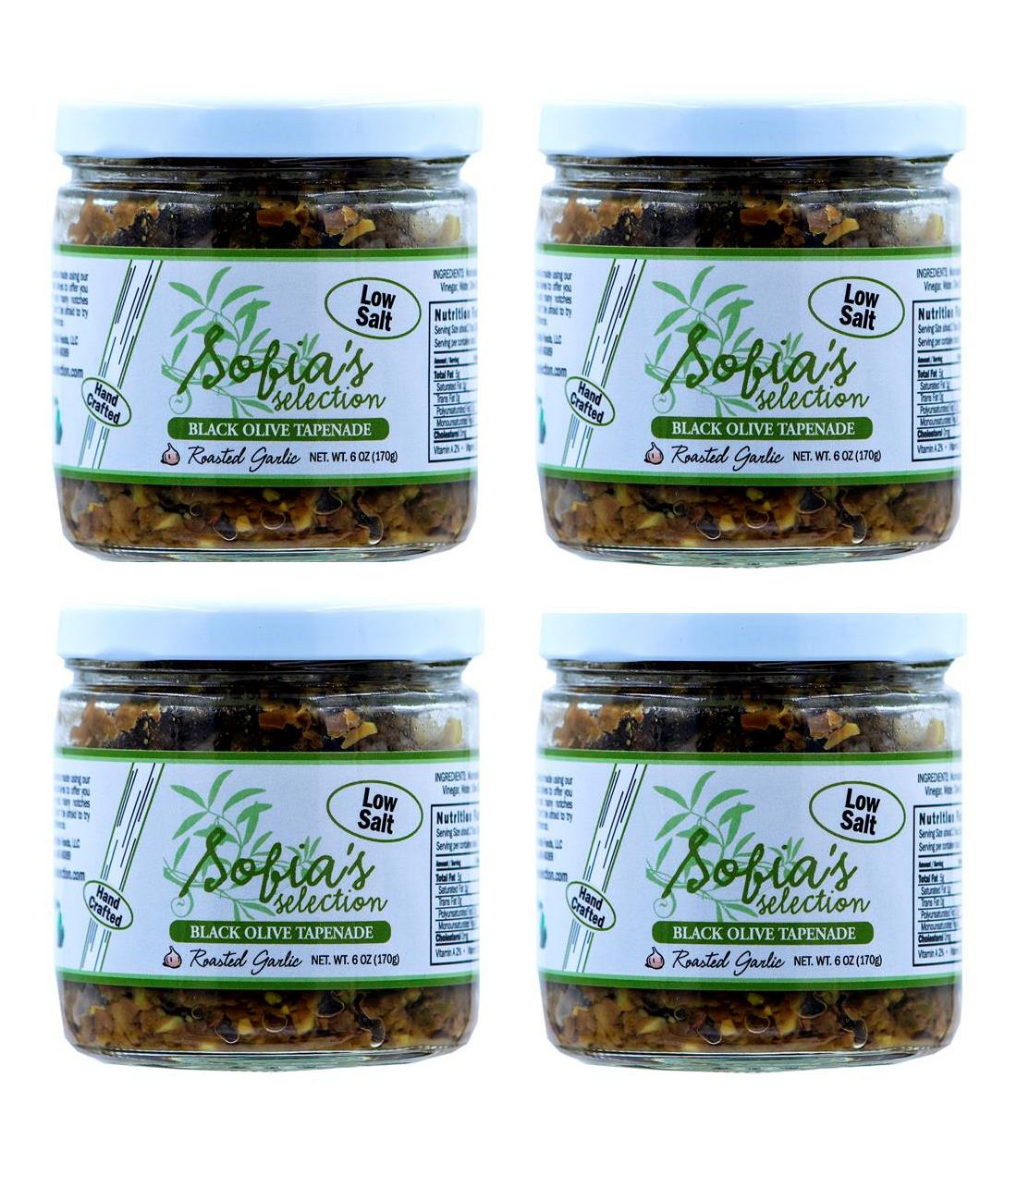 sofias-selection-roasted-garlic-olive-tapenade-4-pack